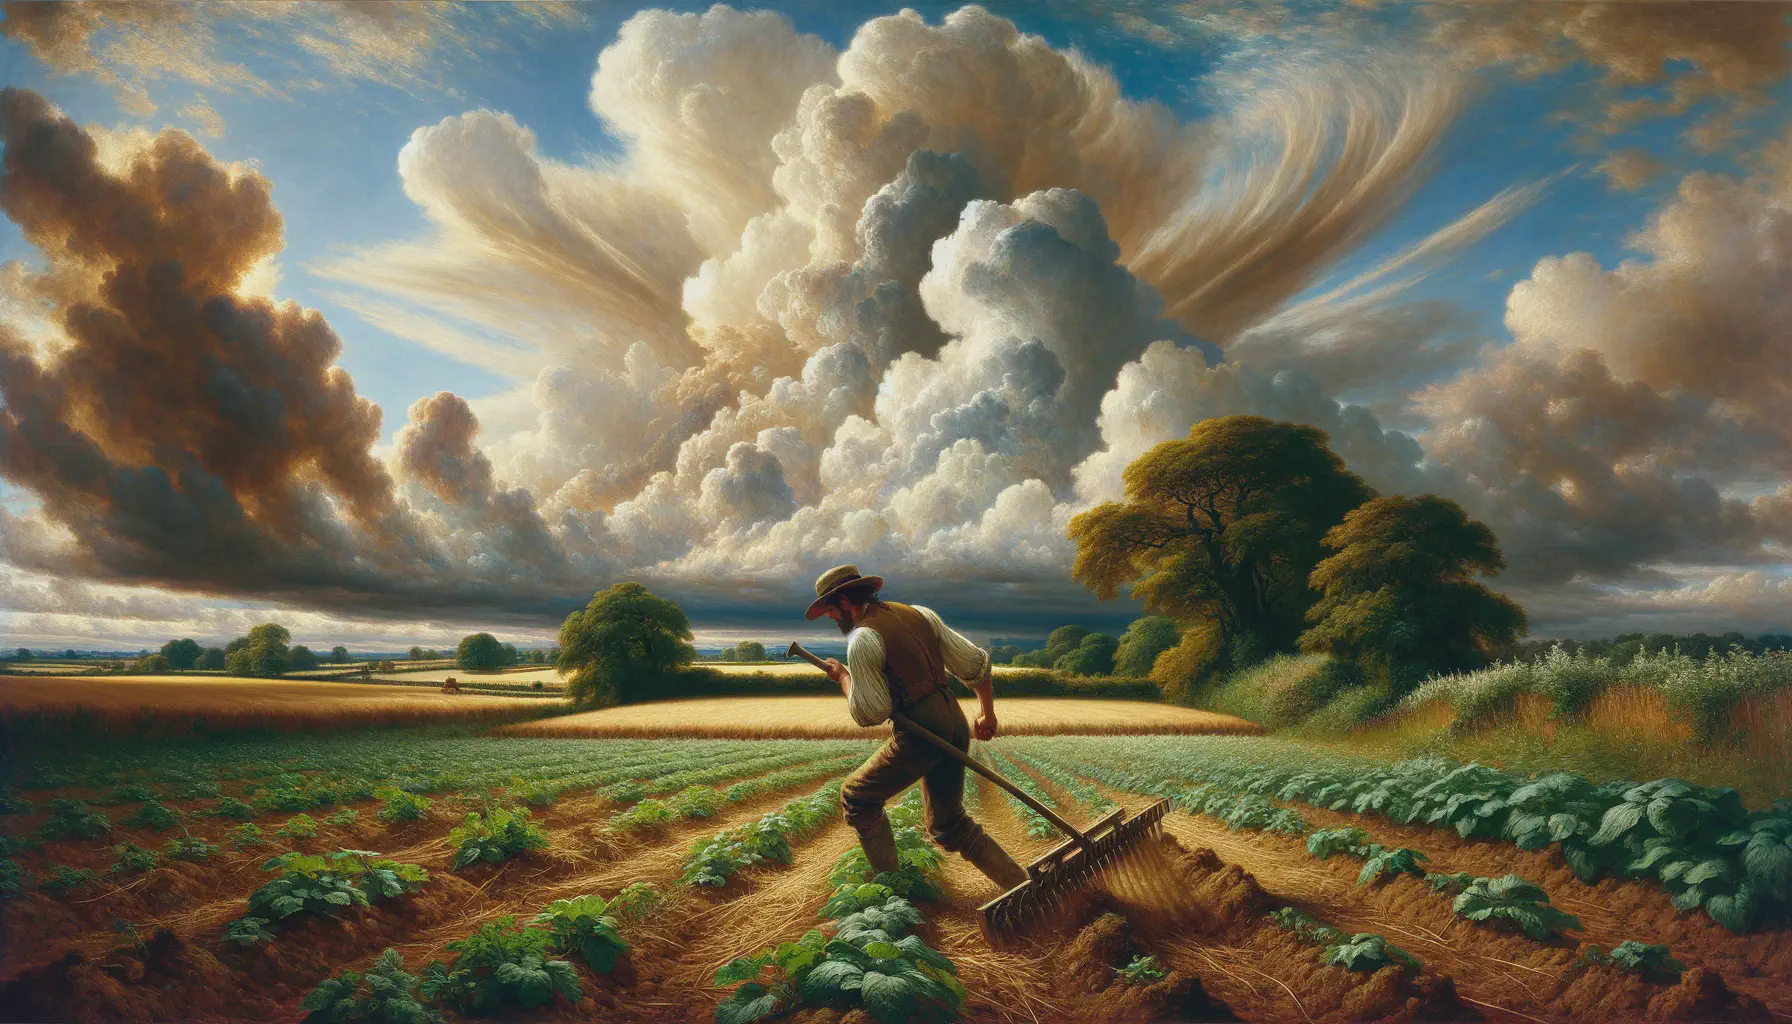 A farmer hoeing his field in the style of John Constable.